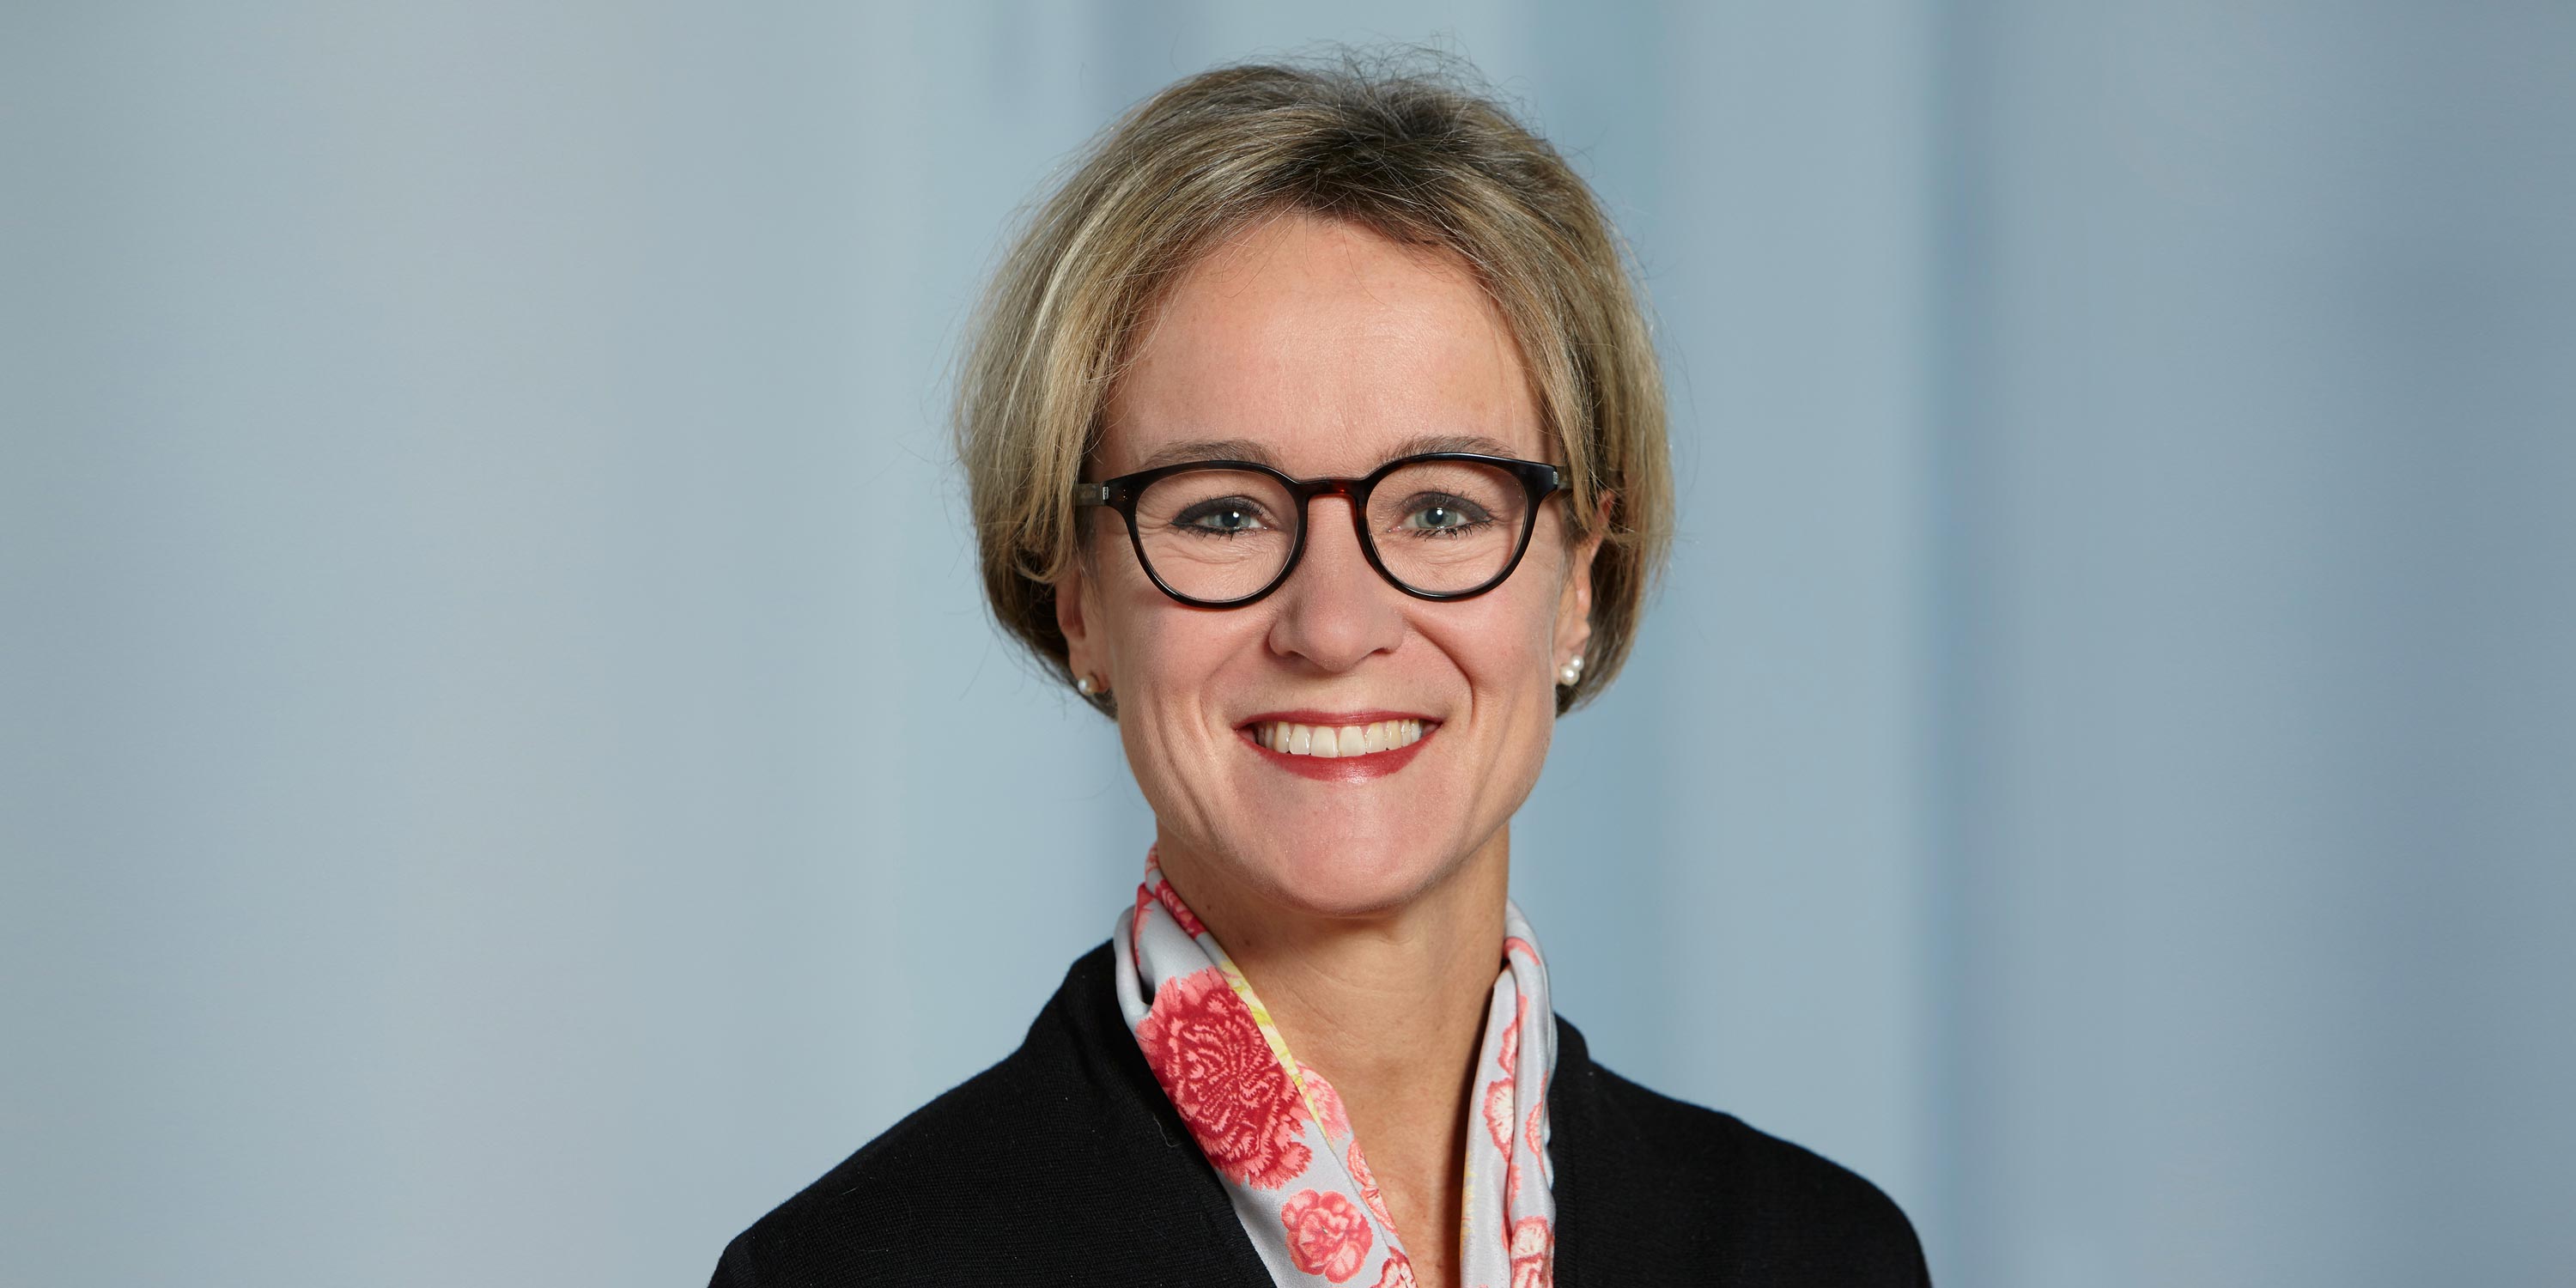 Portrait photo of Annette Oxenius with glasses and scarf, laughing.